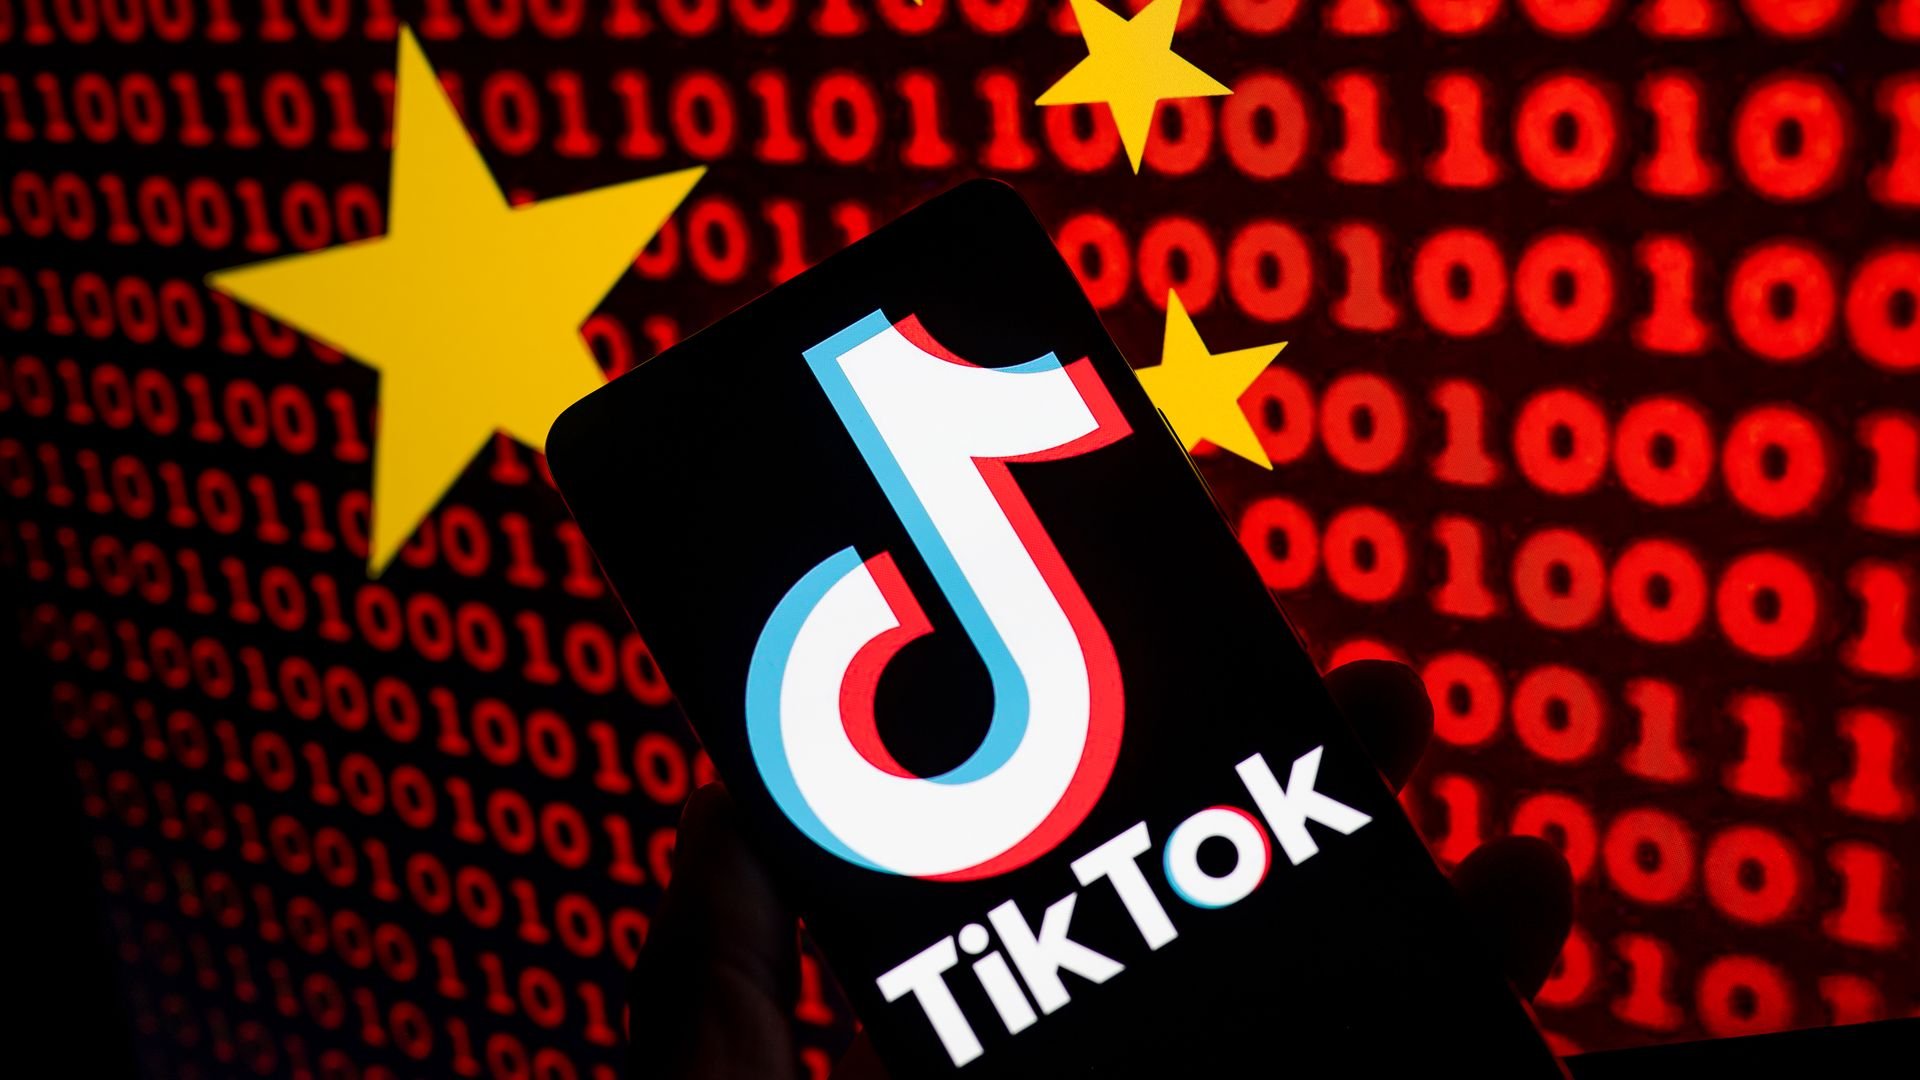 China would "resolutely oppose" forced sale of TikTok